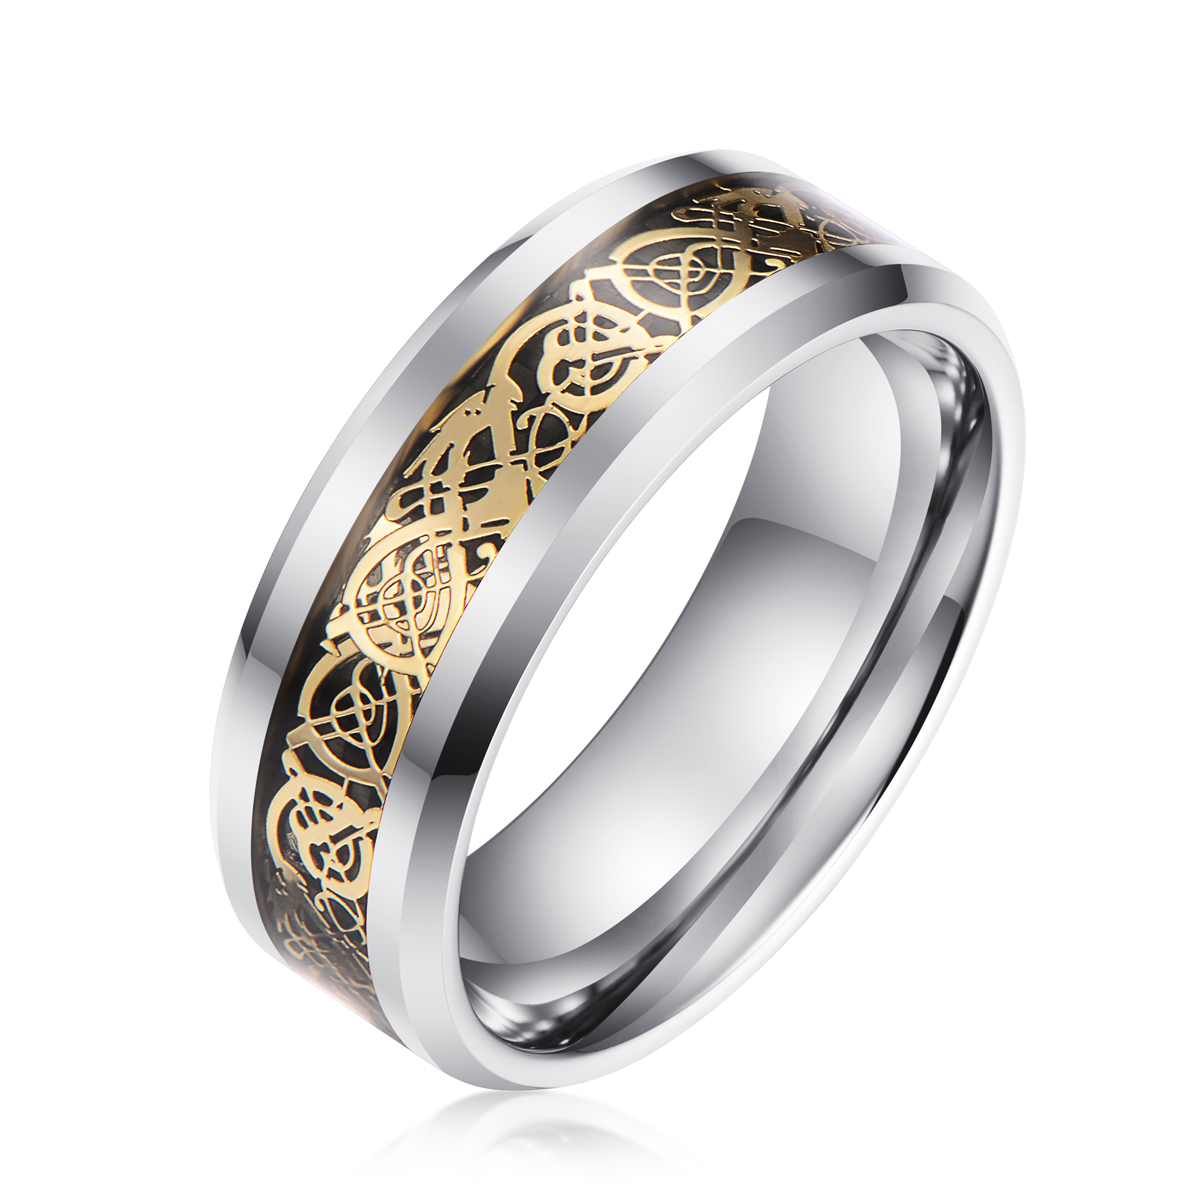 China Tungsten ring supplier rings for men Dragon plated inlay silver plated men jewelry Featured Image